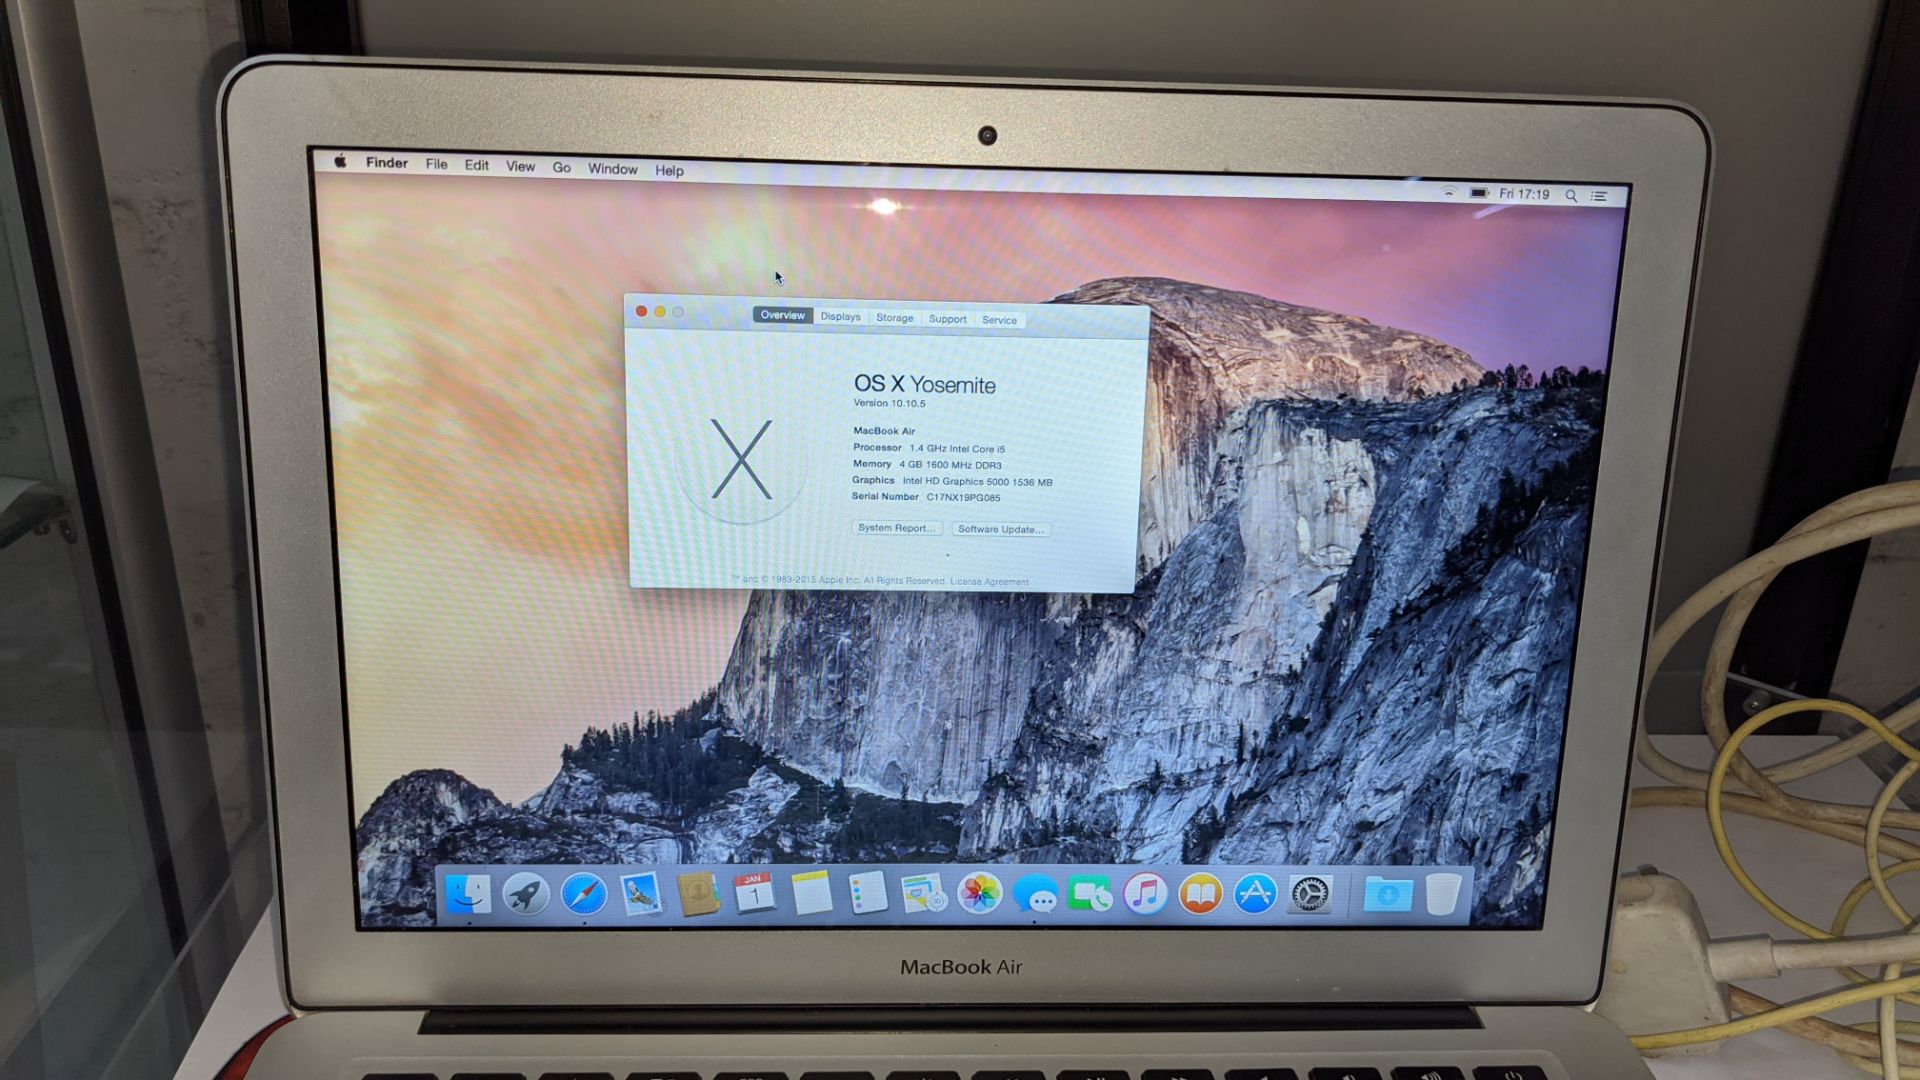 Apple MacBook Air in silver model A1466 with 1.4GHz Intel Core i5, 120Gb storage, 4Gb 1600MHz DDR3, - Image 3 of 12